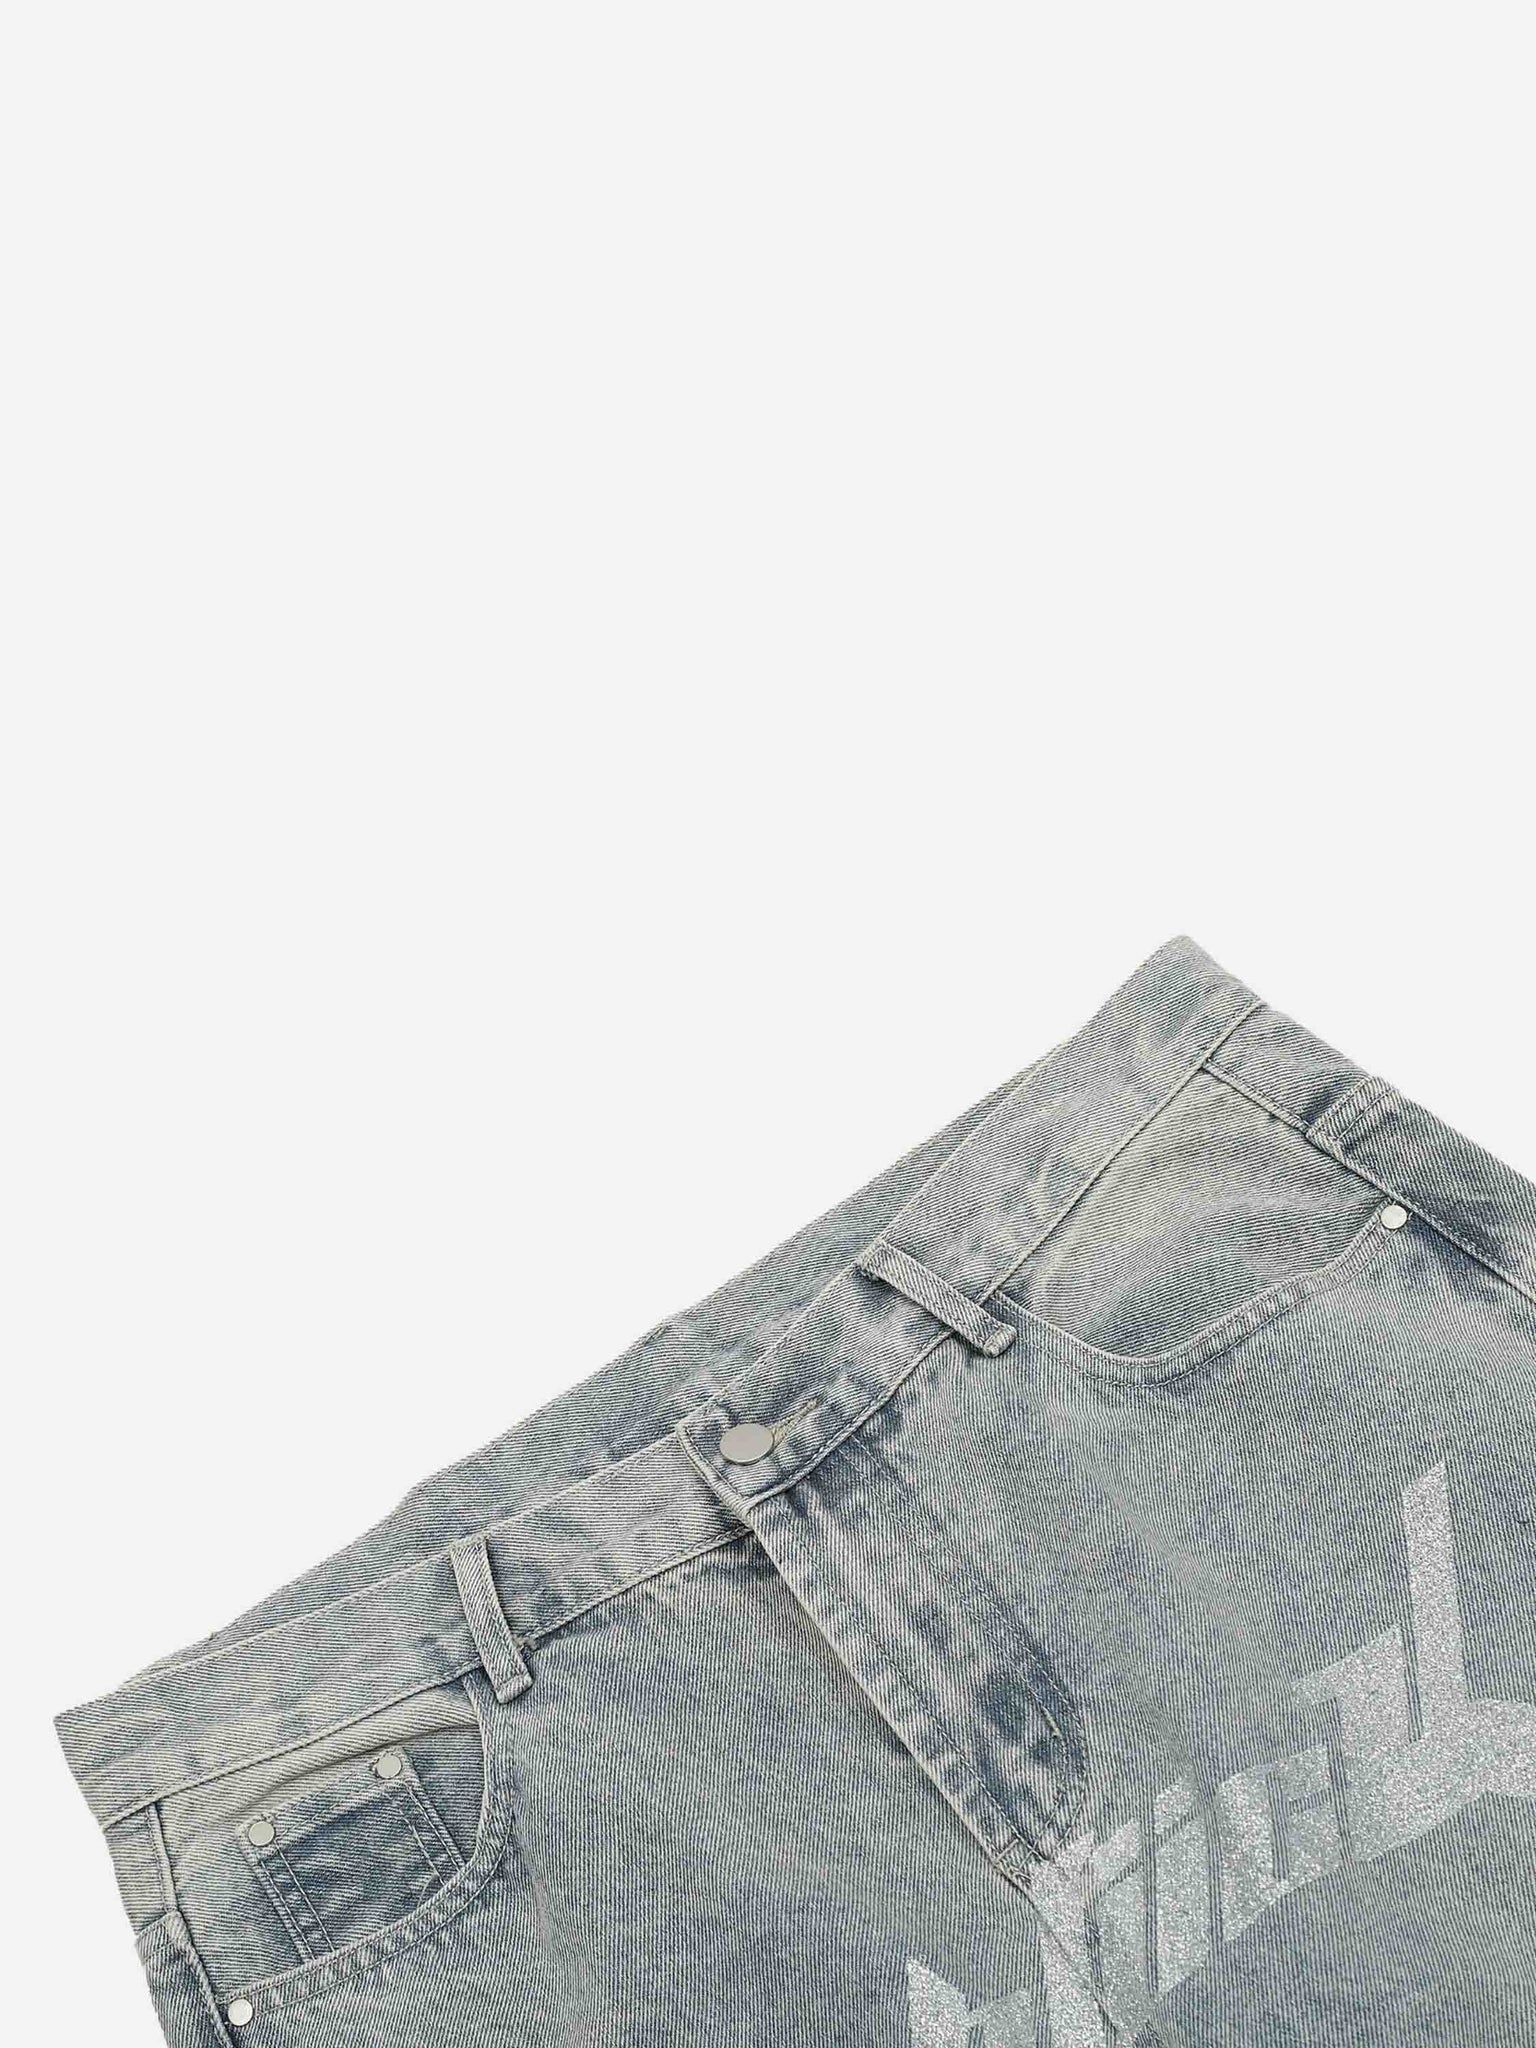 The Supermade Dark Letter Print Jeans